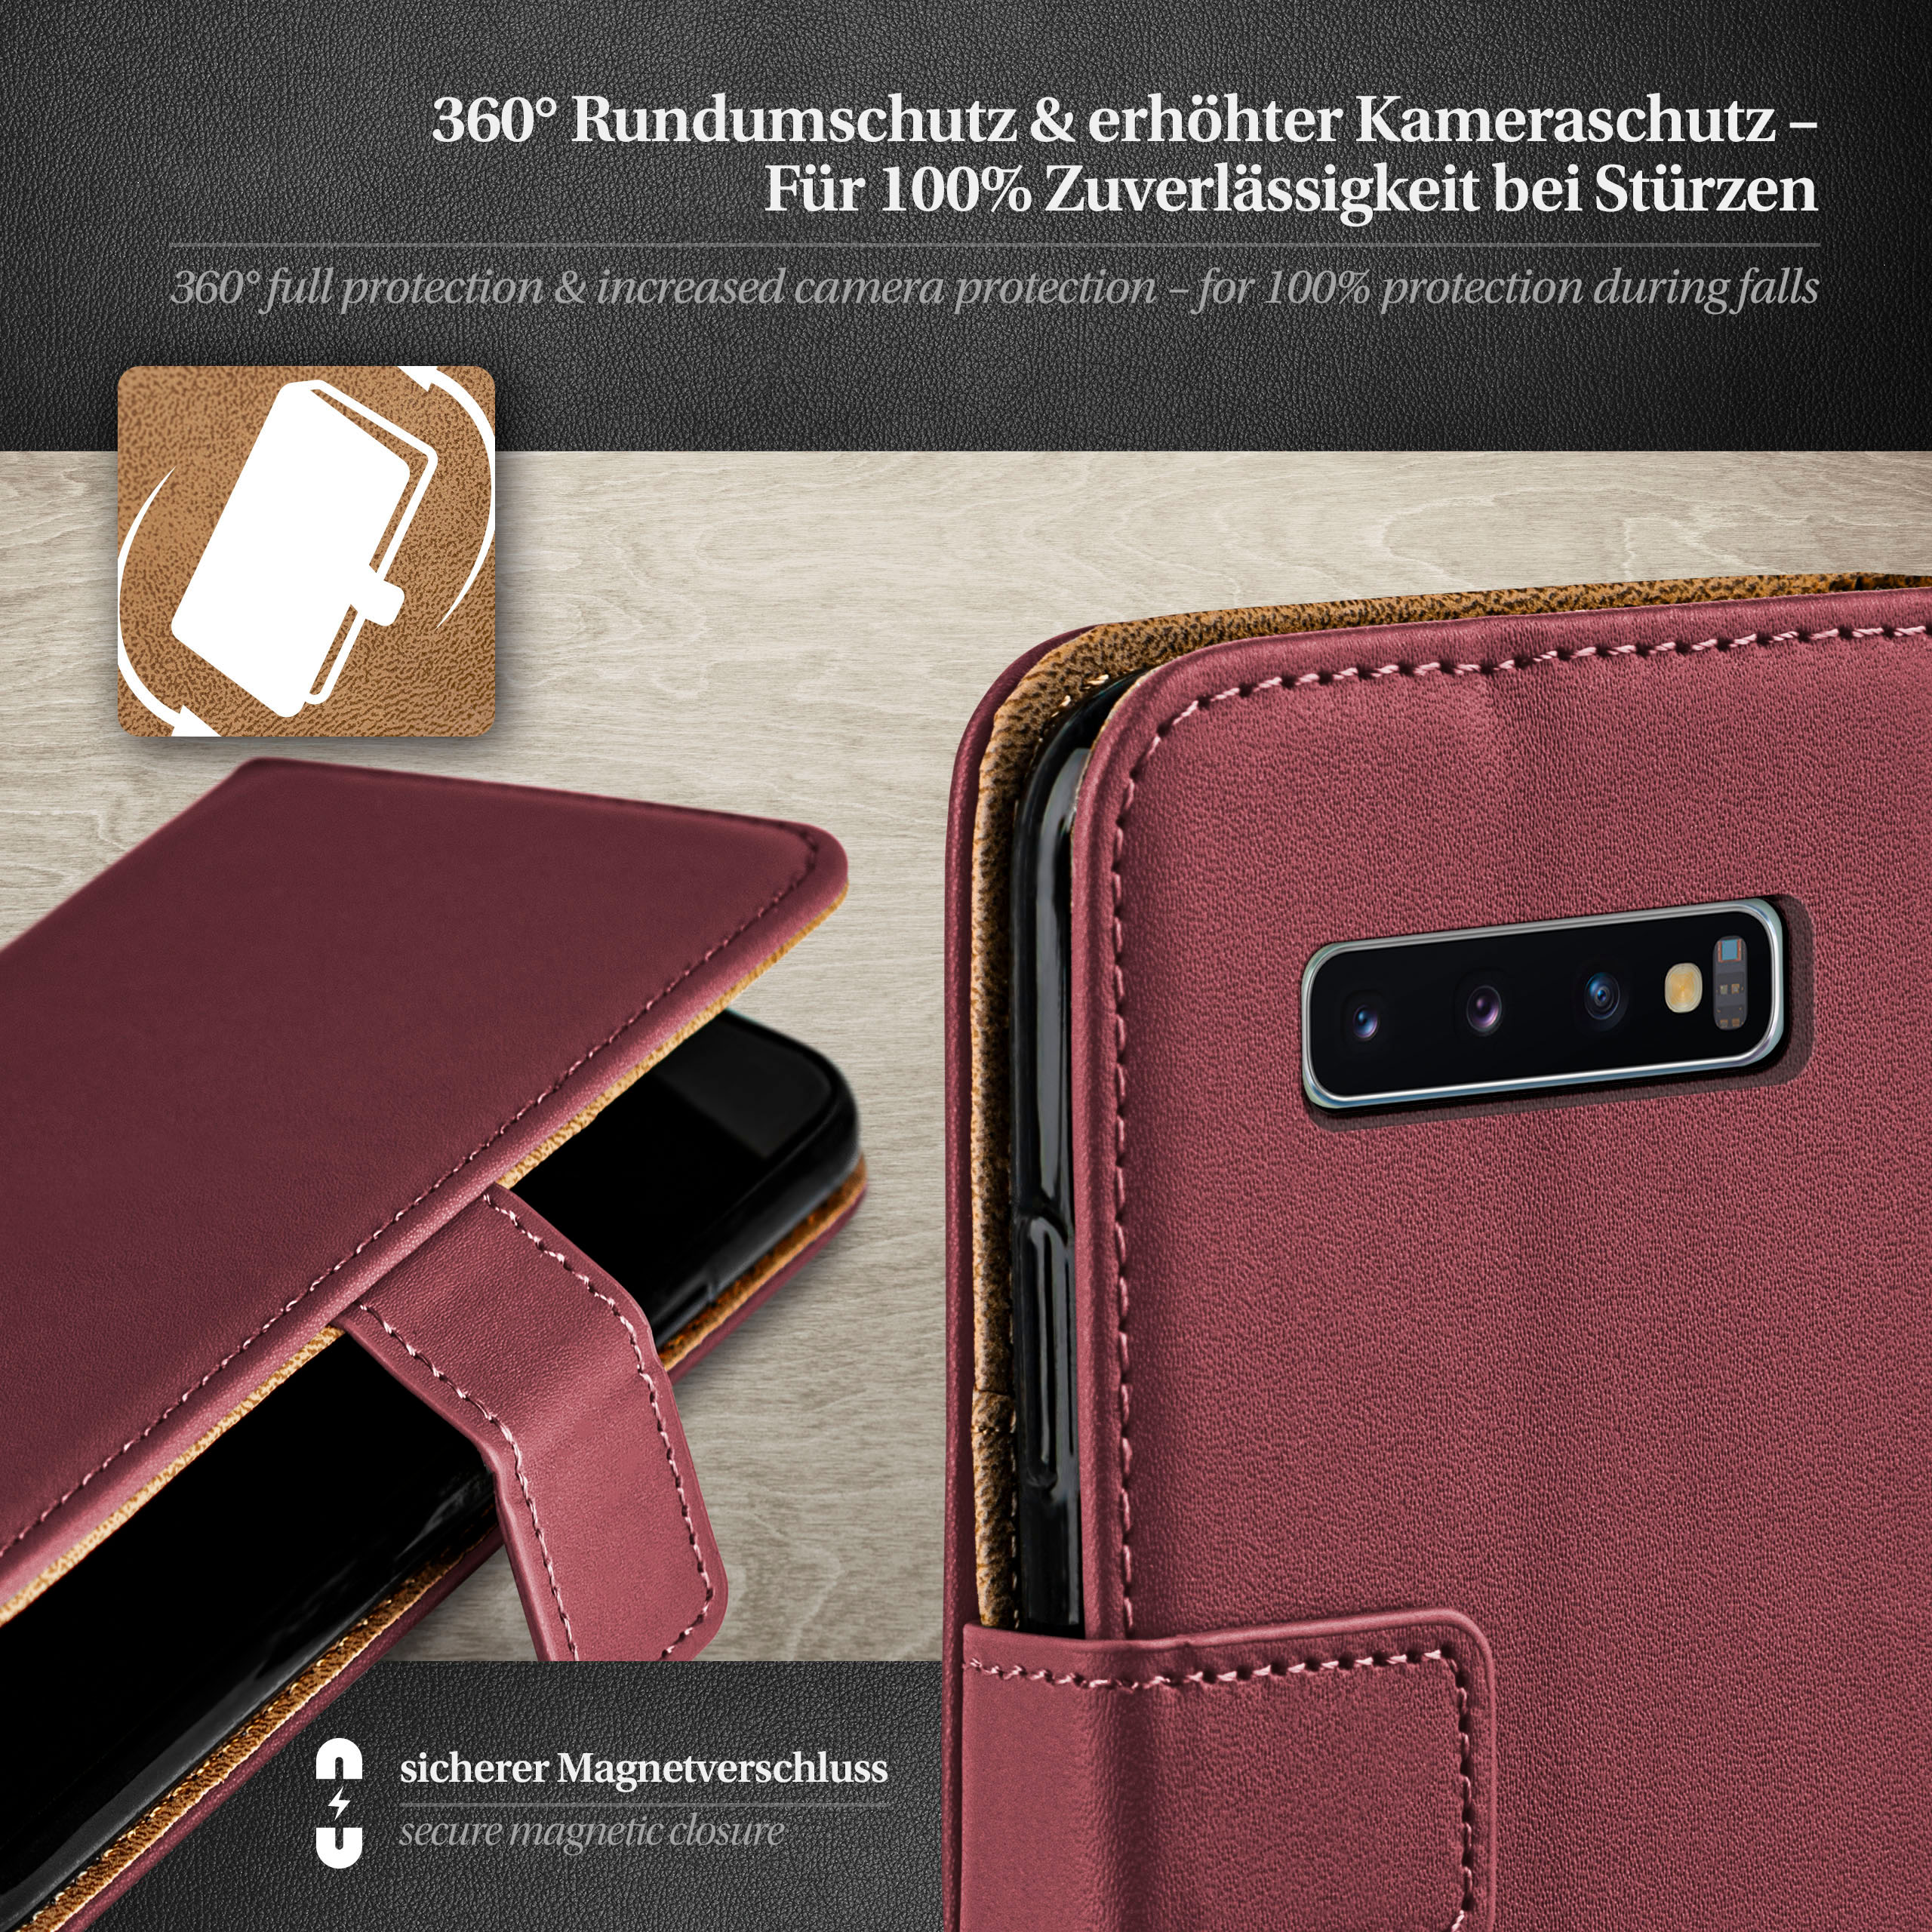 Case, Bookcover, S10, Galaxy MOEX Maroon-Red Book Samsung,